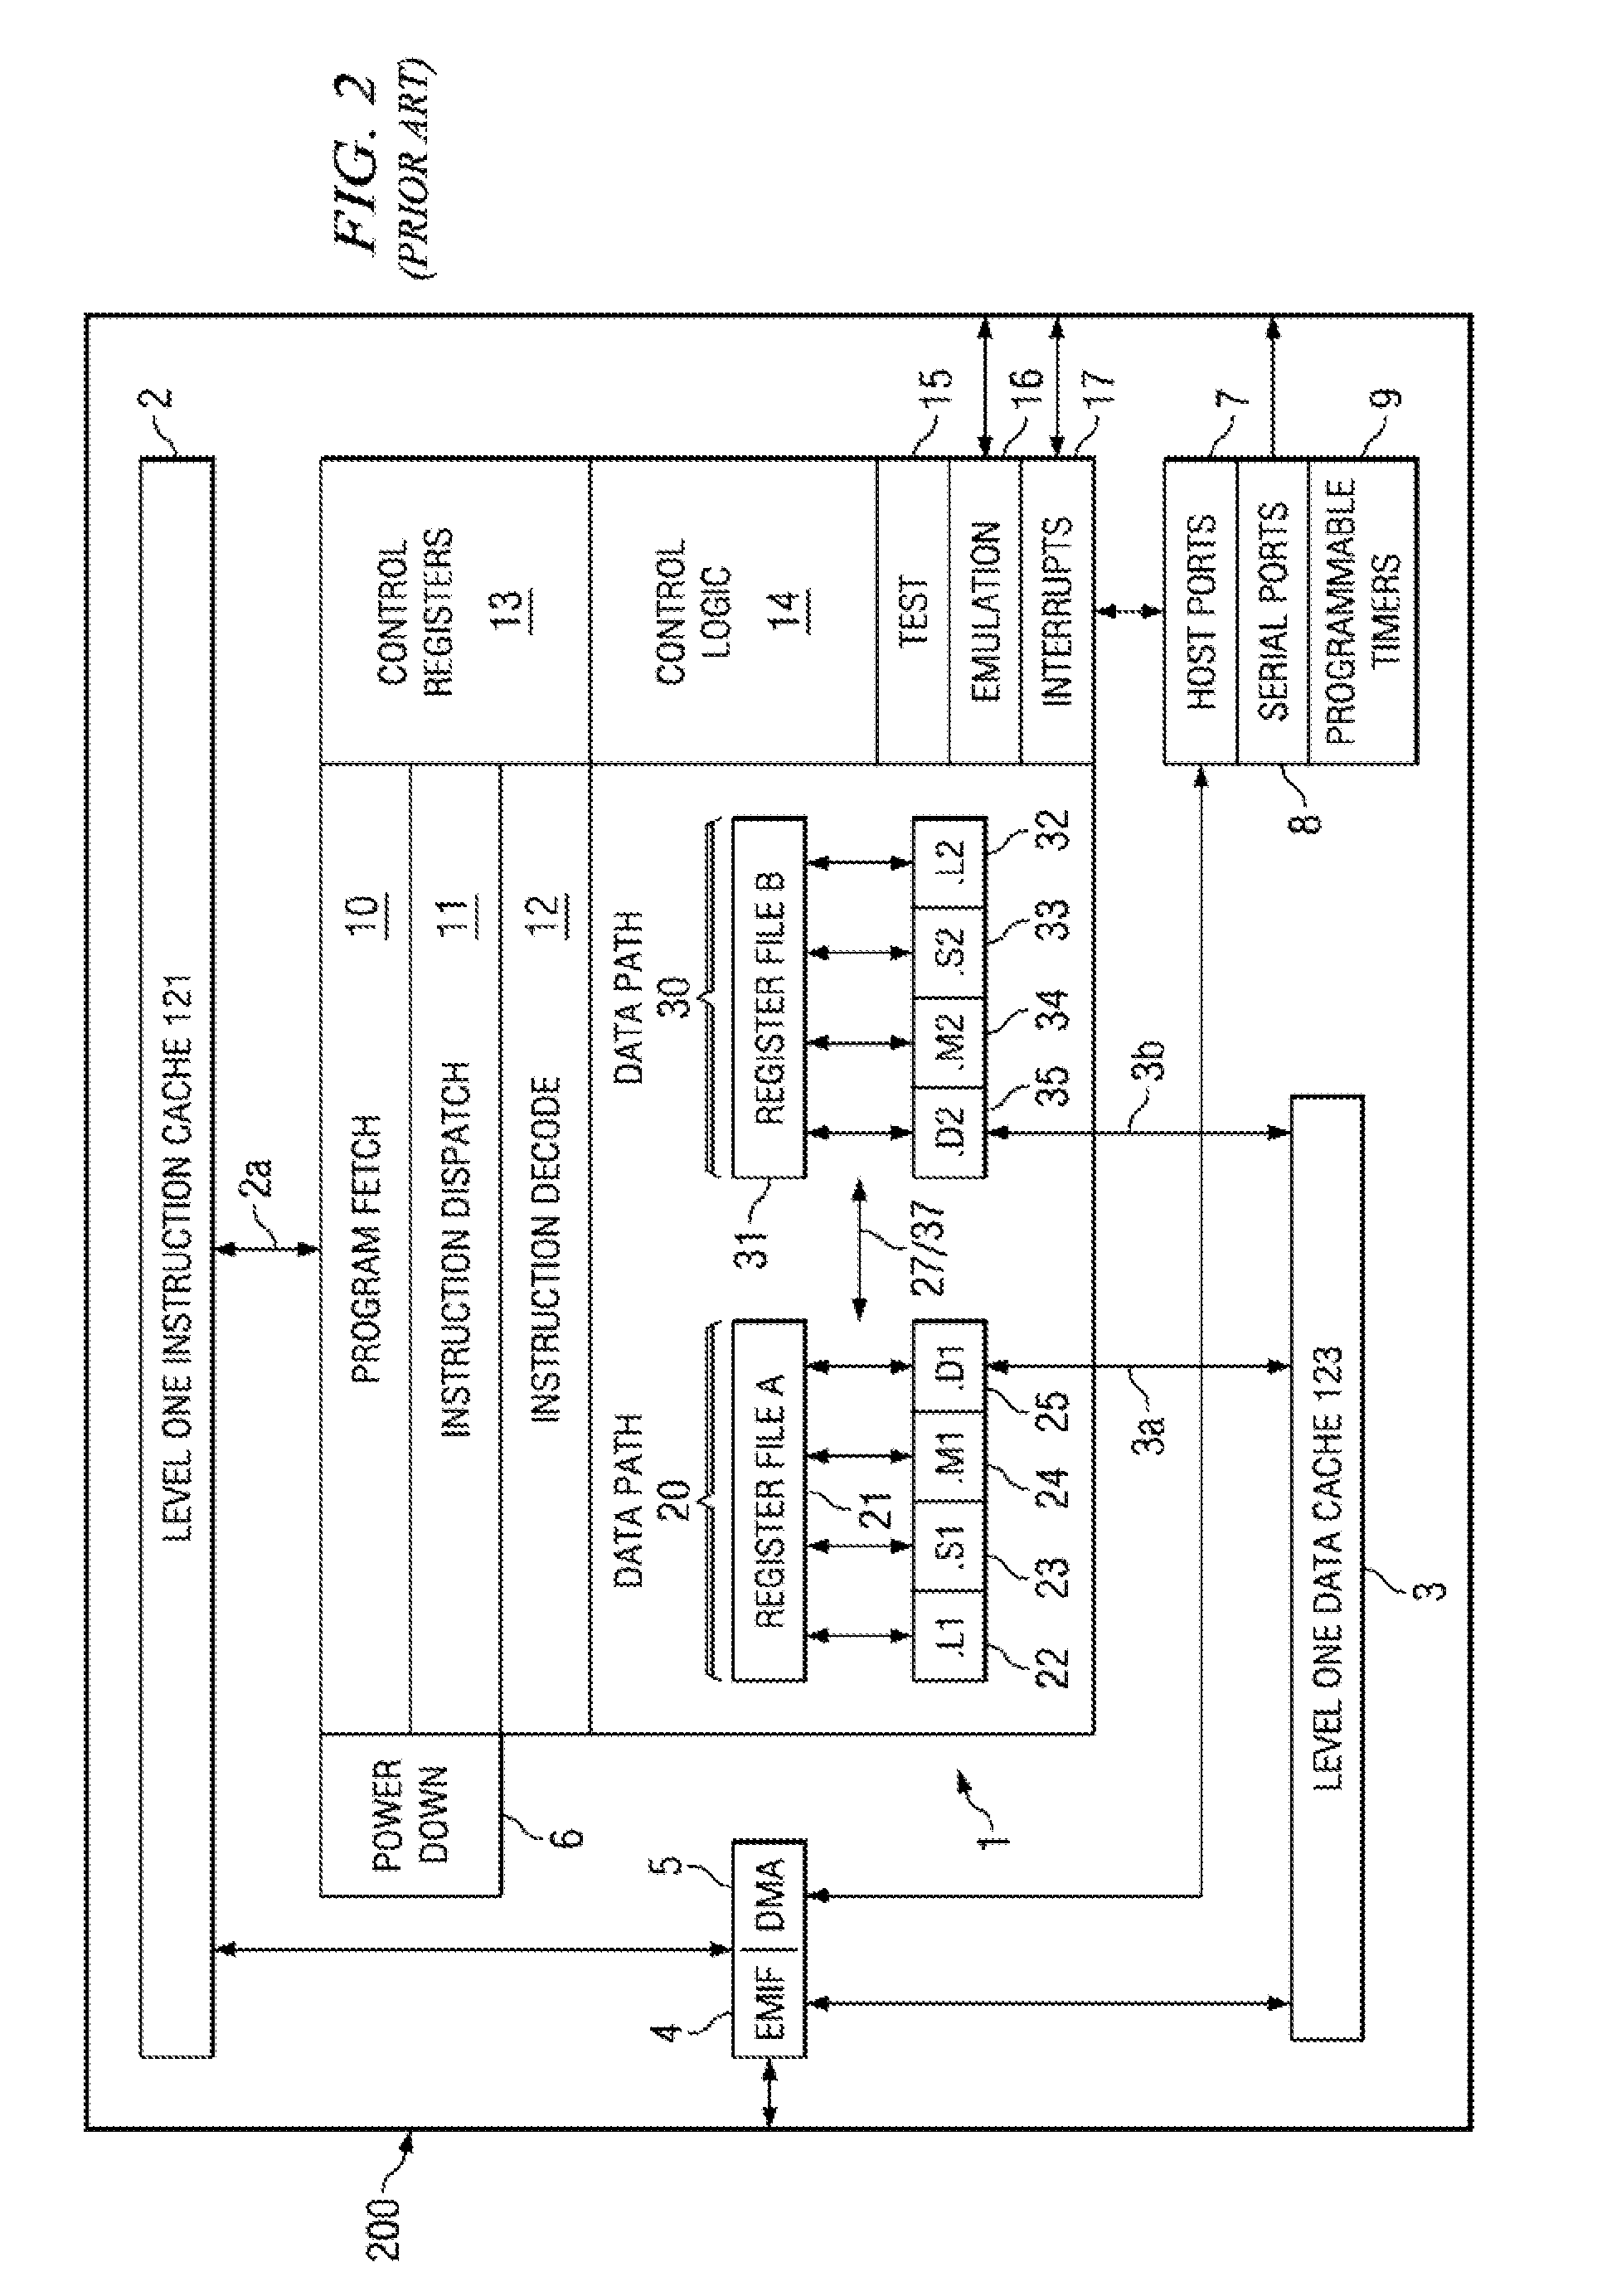 Method for Low Memory Footprint Compressed Video Decoding